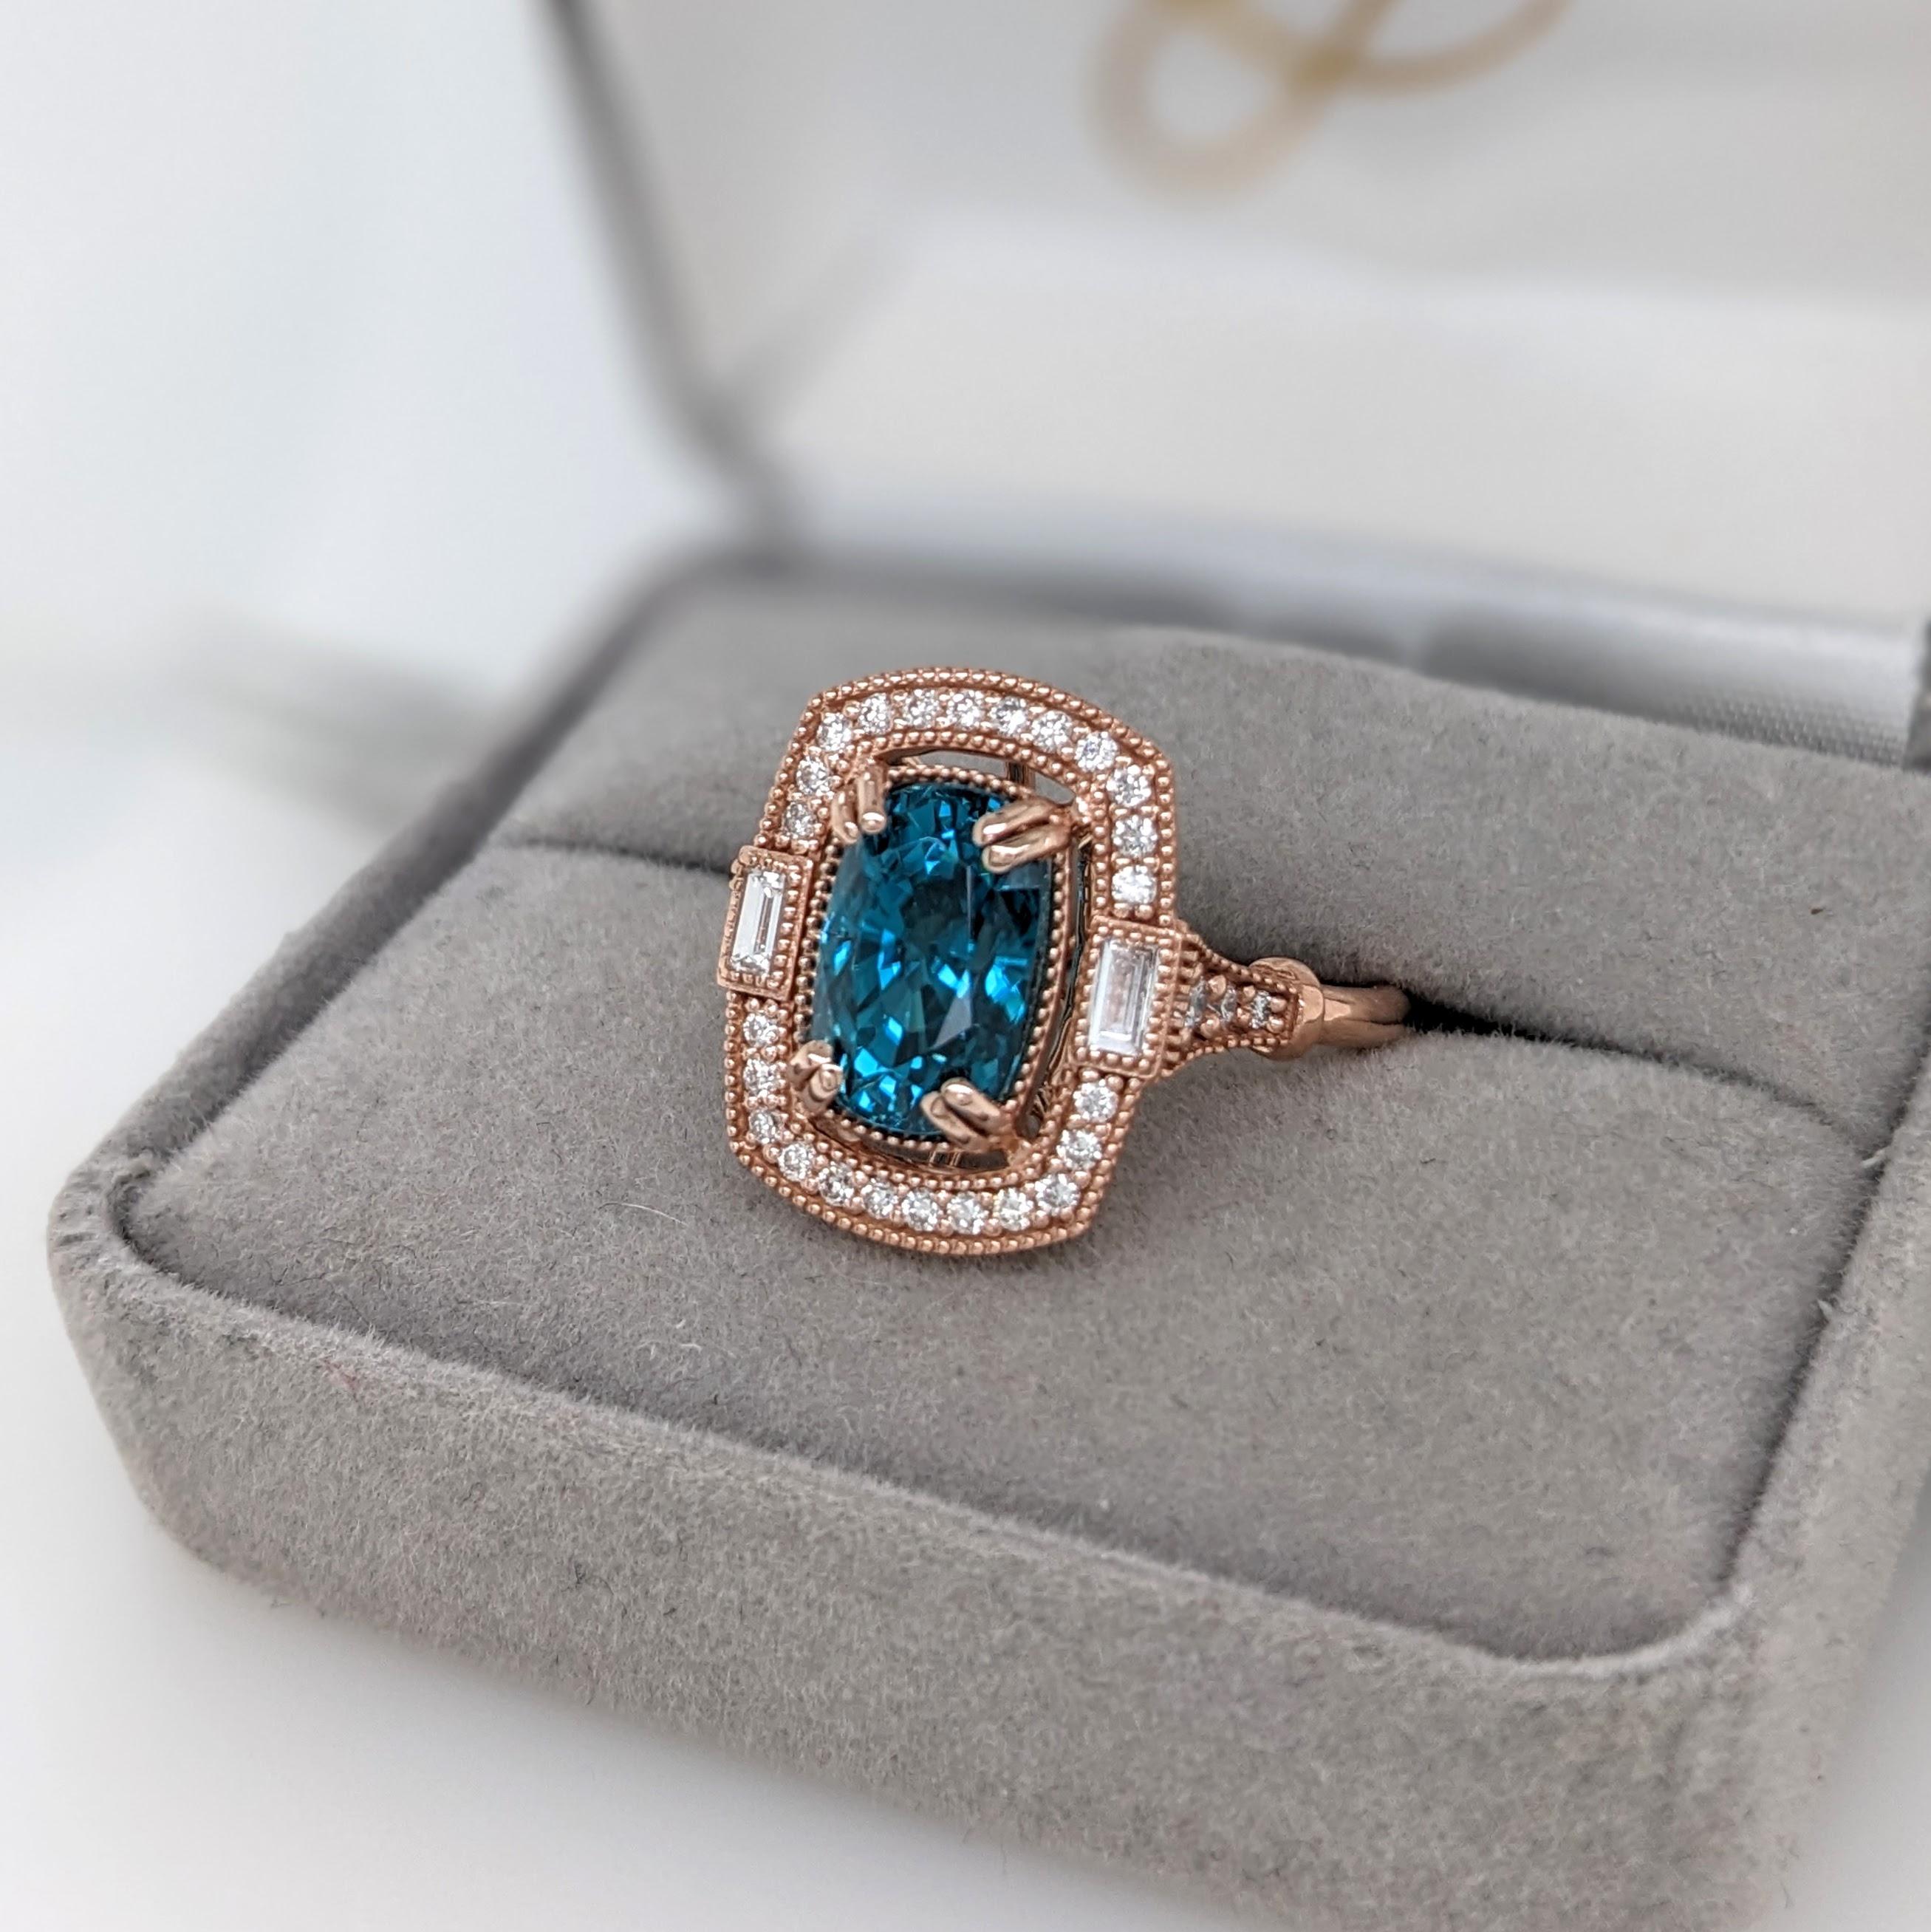 5.4ct Blue Zircon Ring w Earth Mined Diamonds in Solid 14K Rose Gold CU 10x7mm In New Condition For Sale In Columbus, OH